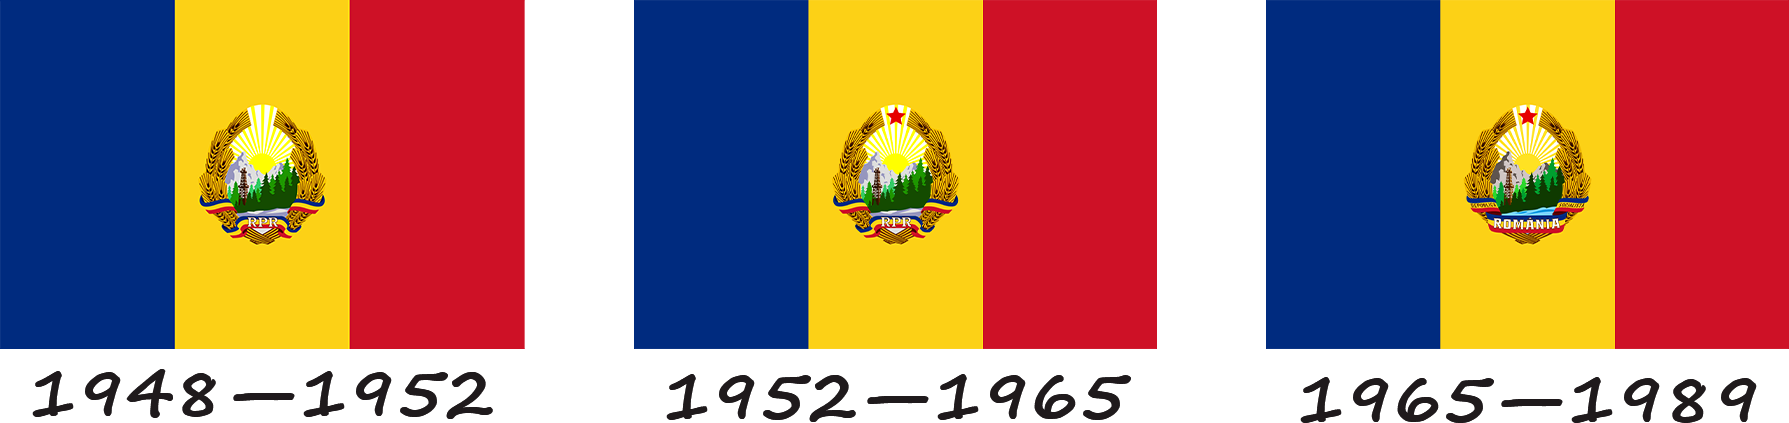 History of the Romanian flag